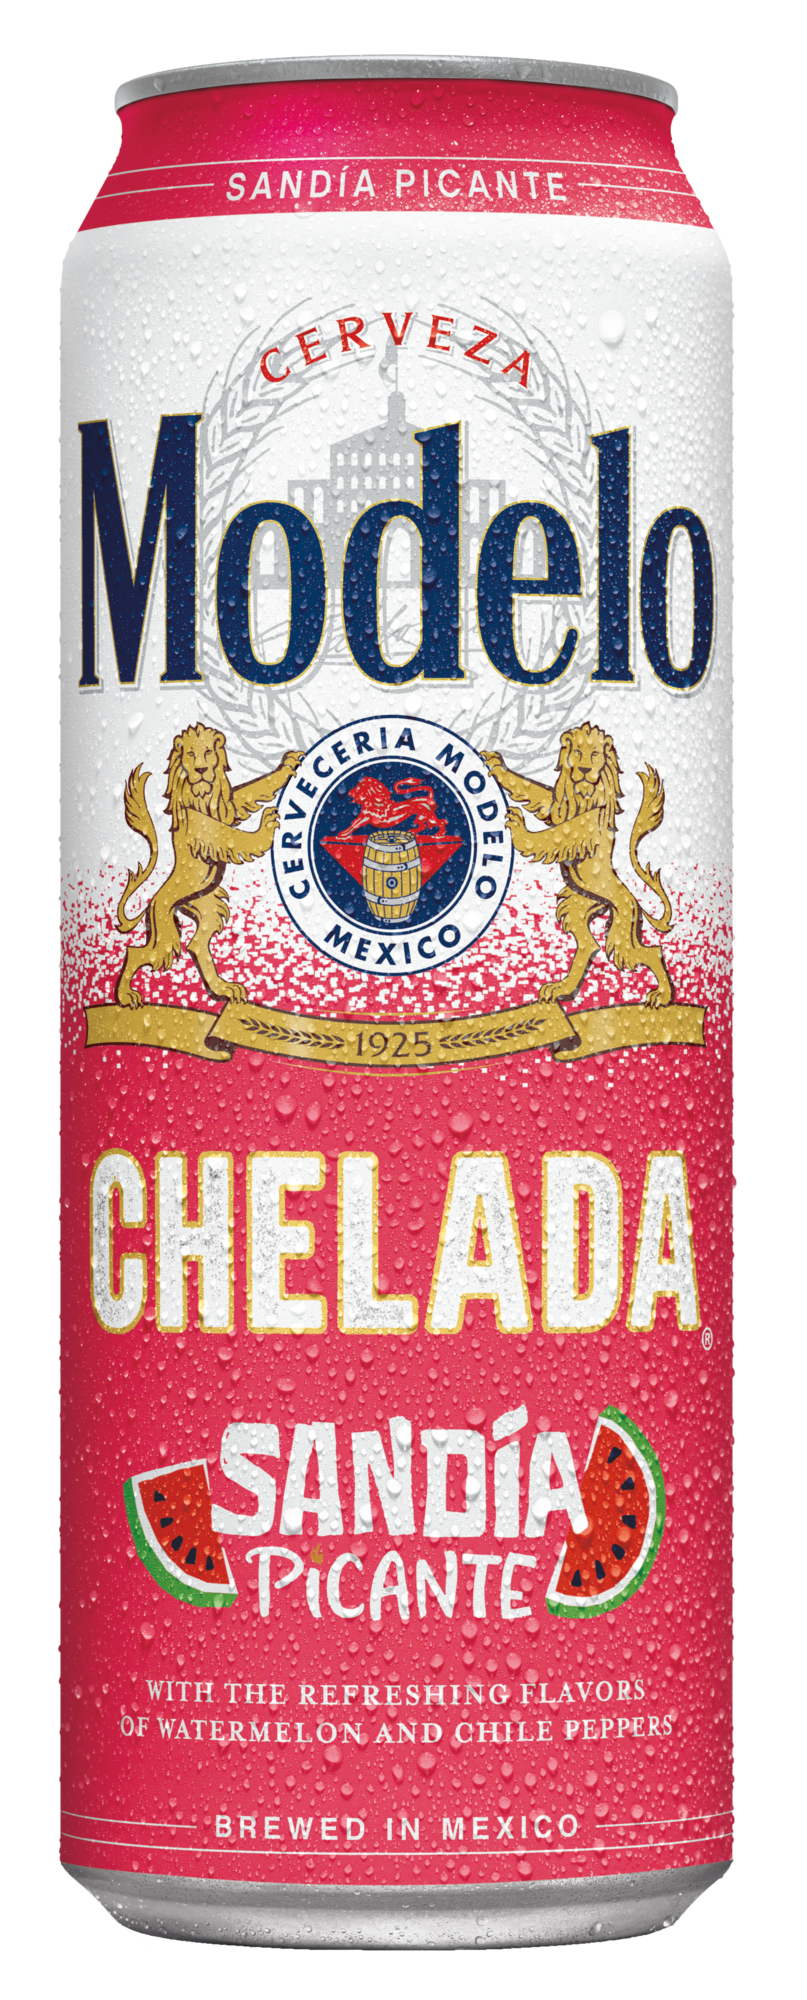 Modelo Chelada Sandia Picante Mexican Import Flavored Beer - Beer - 24oz Can